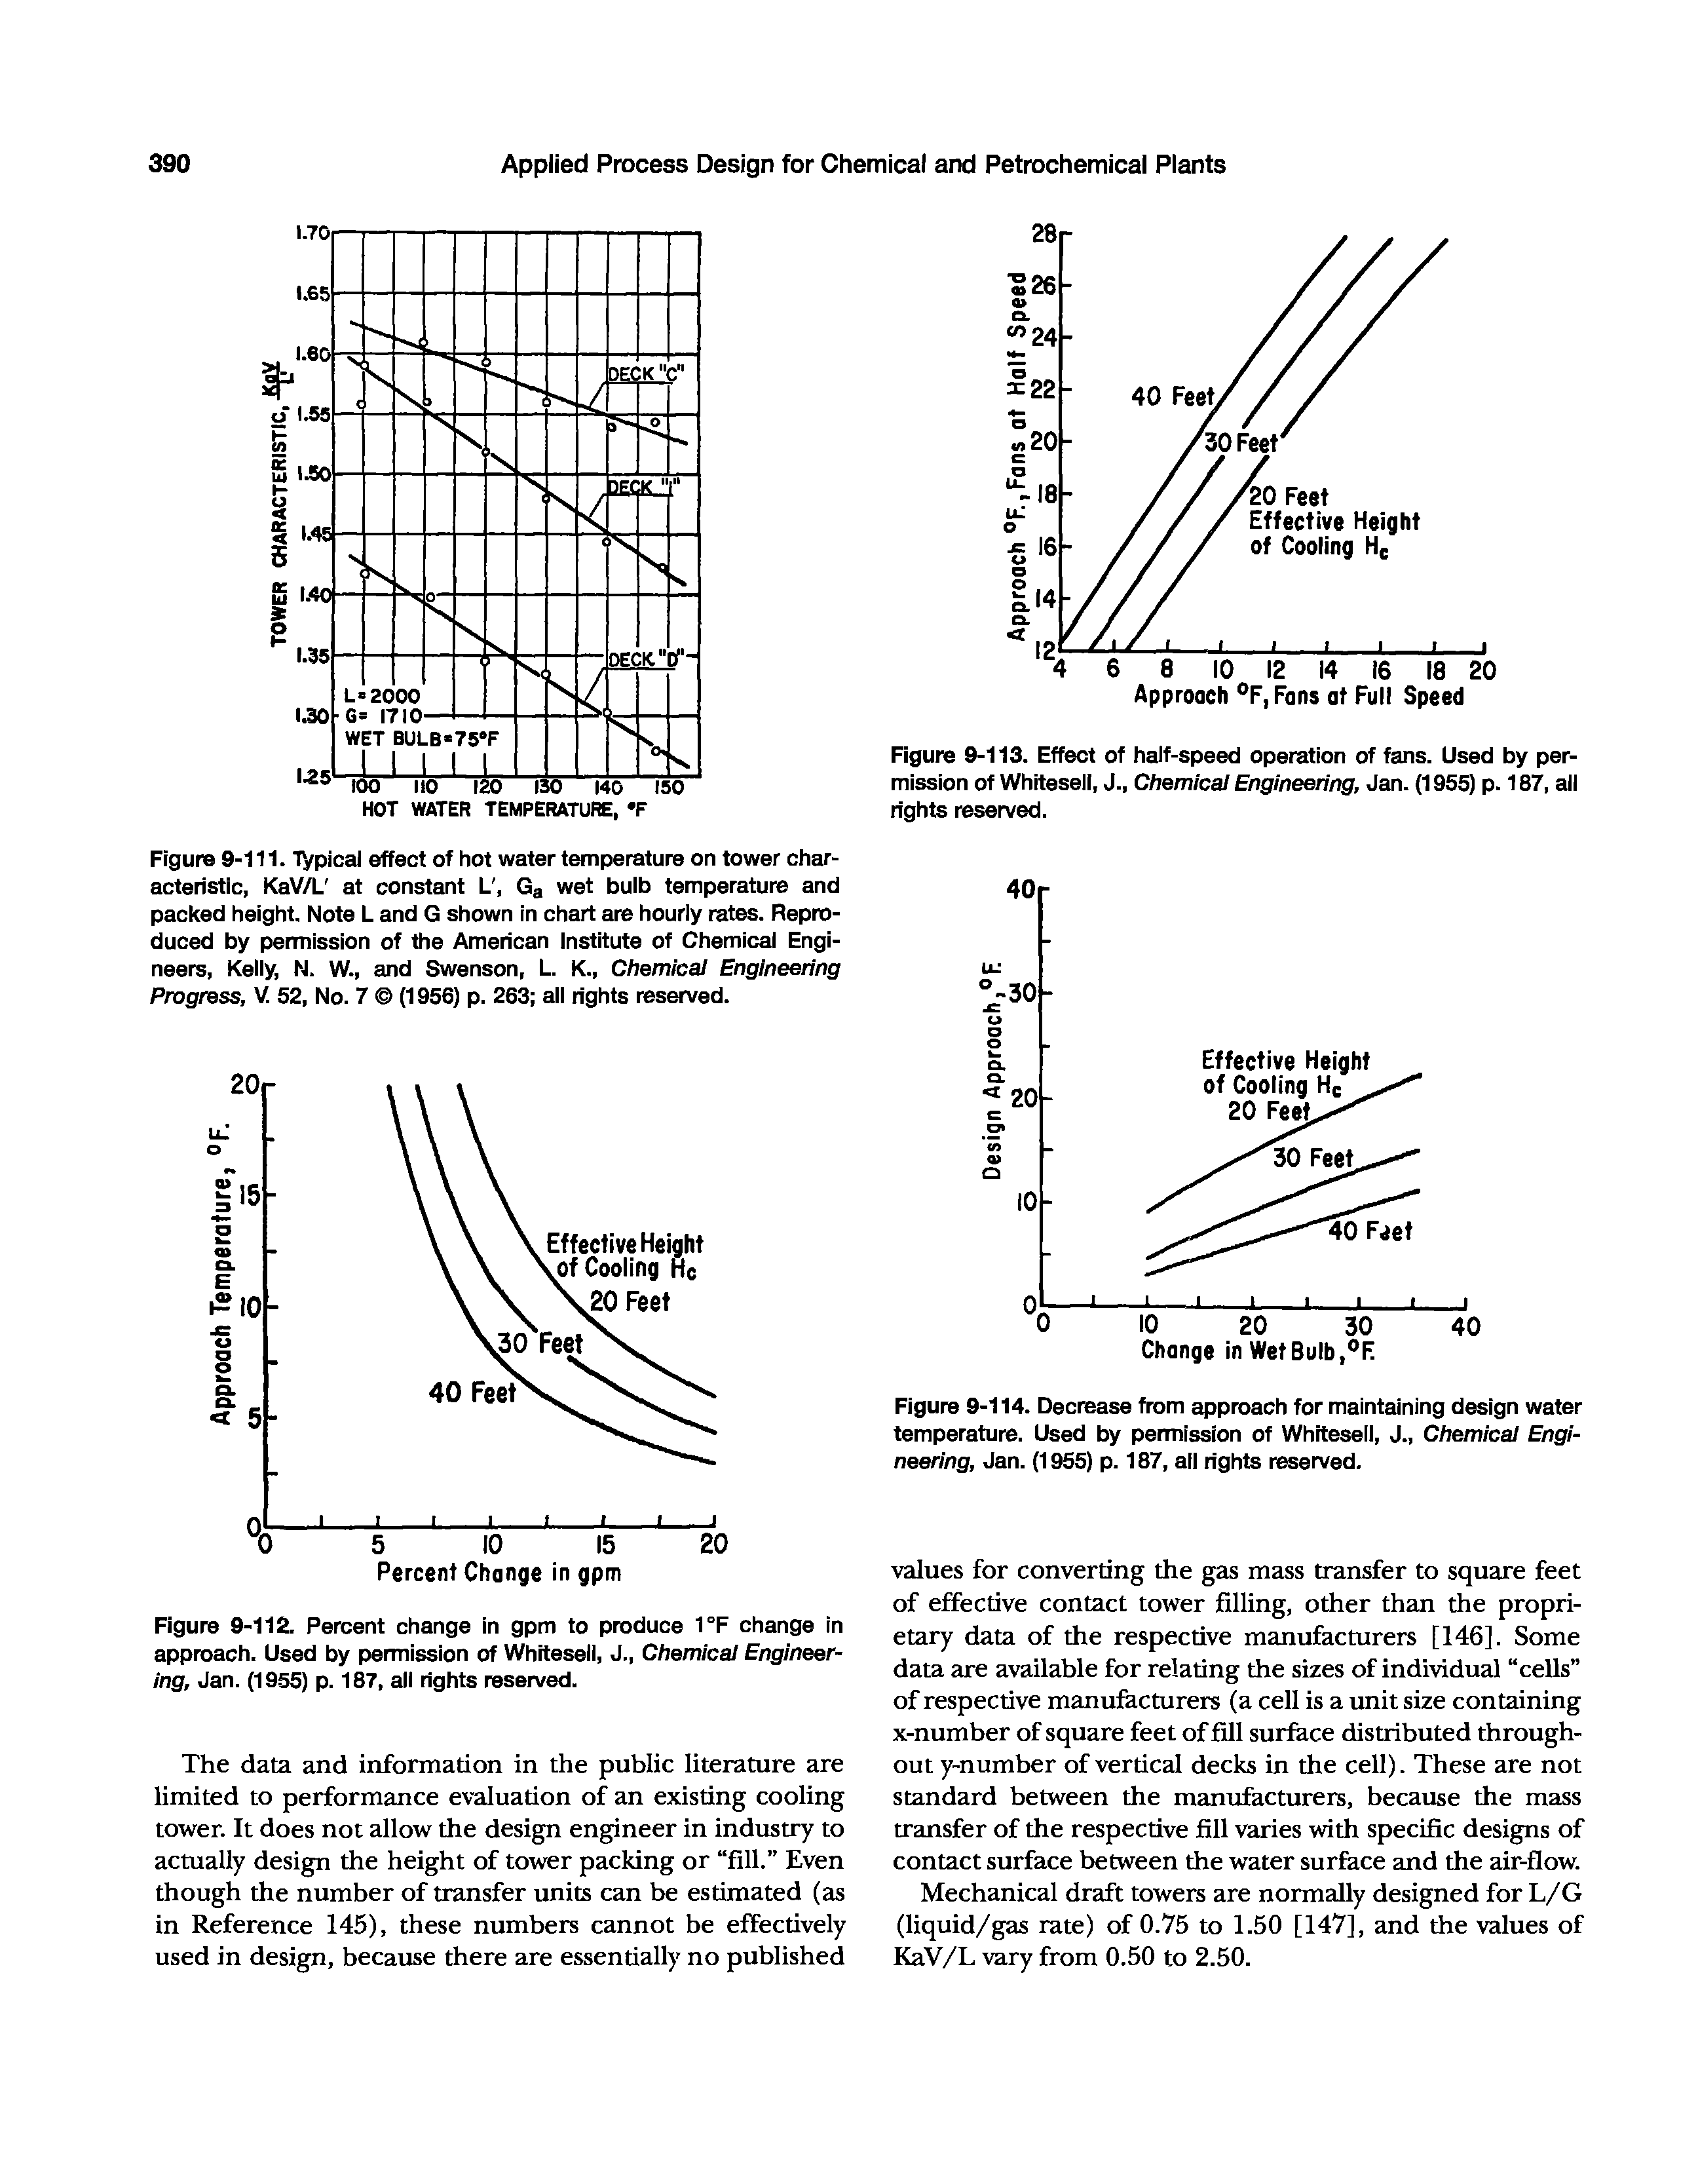 Figure 9-111. Typiccil effect of hot water temperature on tower characteristic, KaV/L at constant L, Ga wet buib temperature and packed height. Note L and G shown in chart are hourly rates. Reproduced by permission of the American Institute of Chemical Engineers, Kelly, N. W., and Swenson, L. K., Chemical Engineering Progress, V. 52, No. 7 (1956) p. 263 all rights reserved.